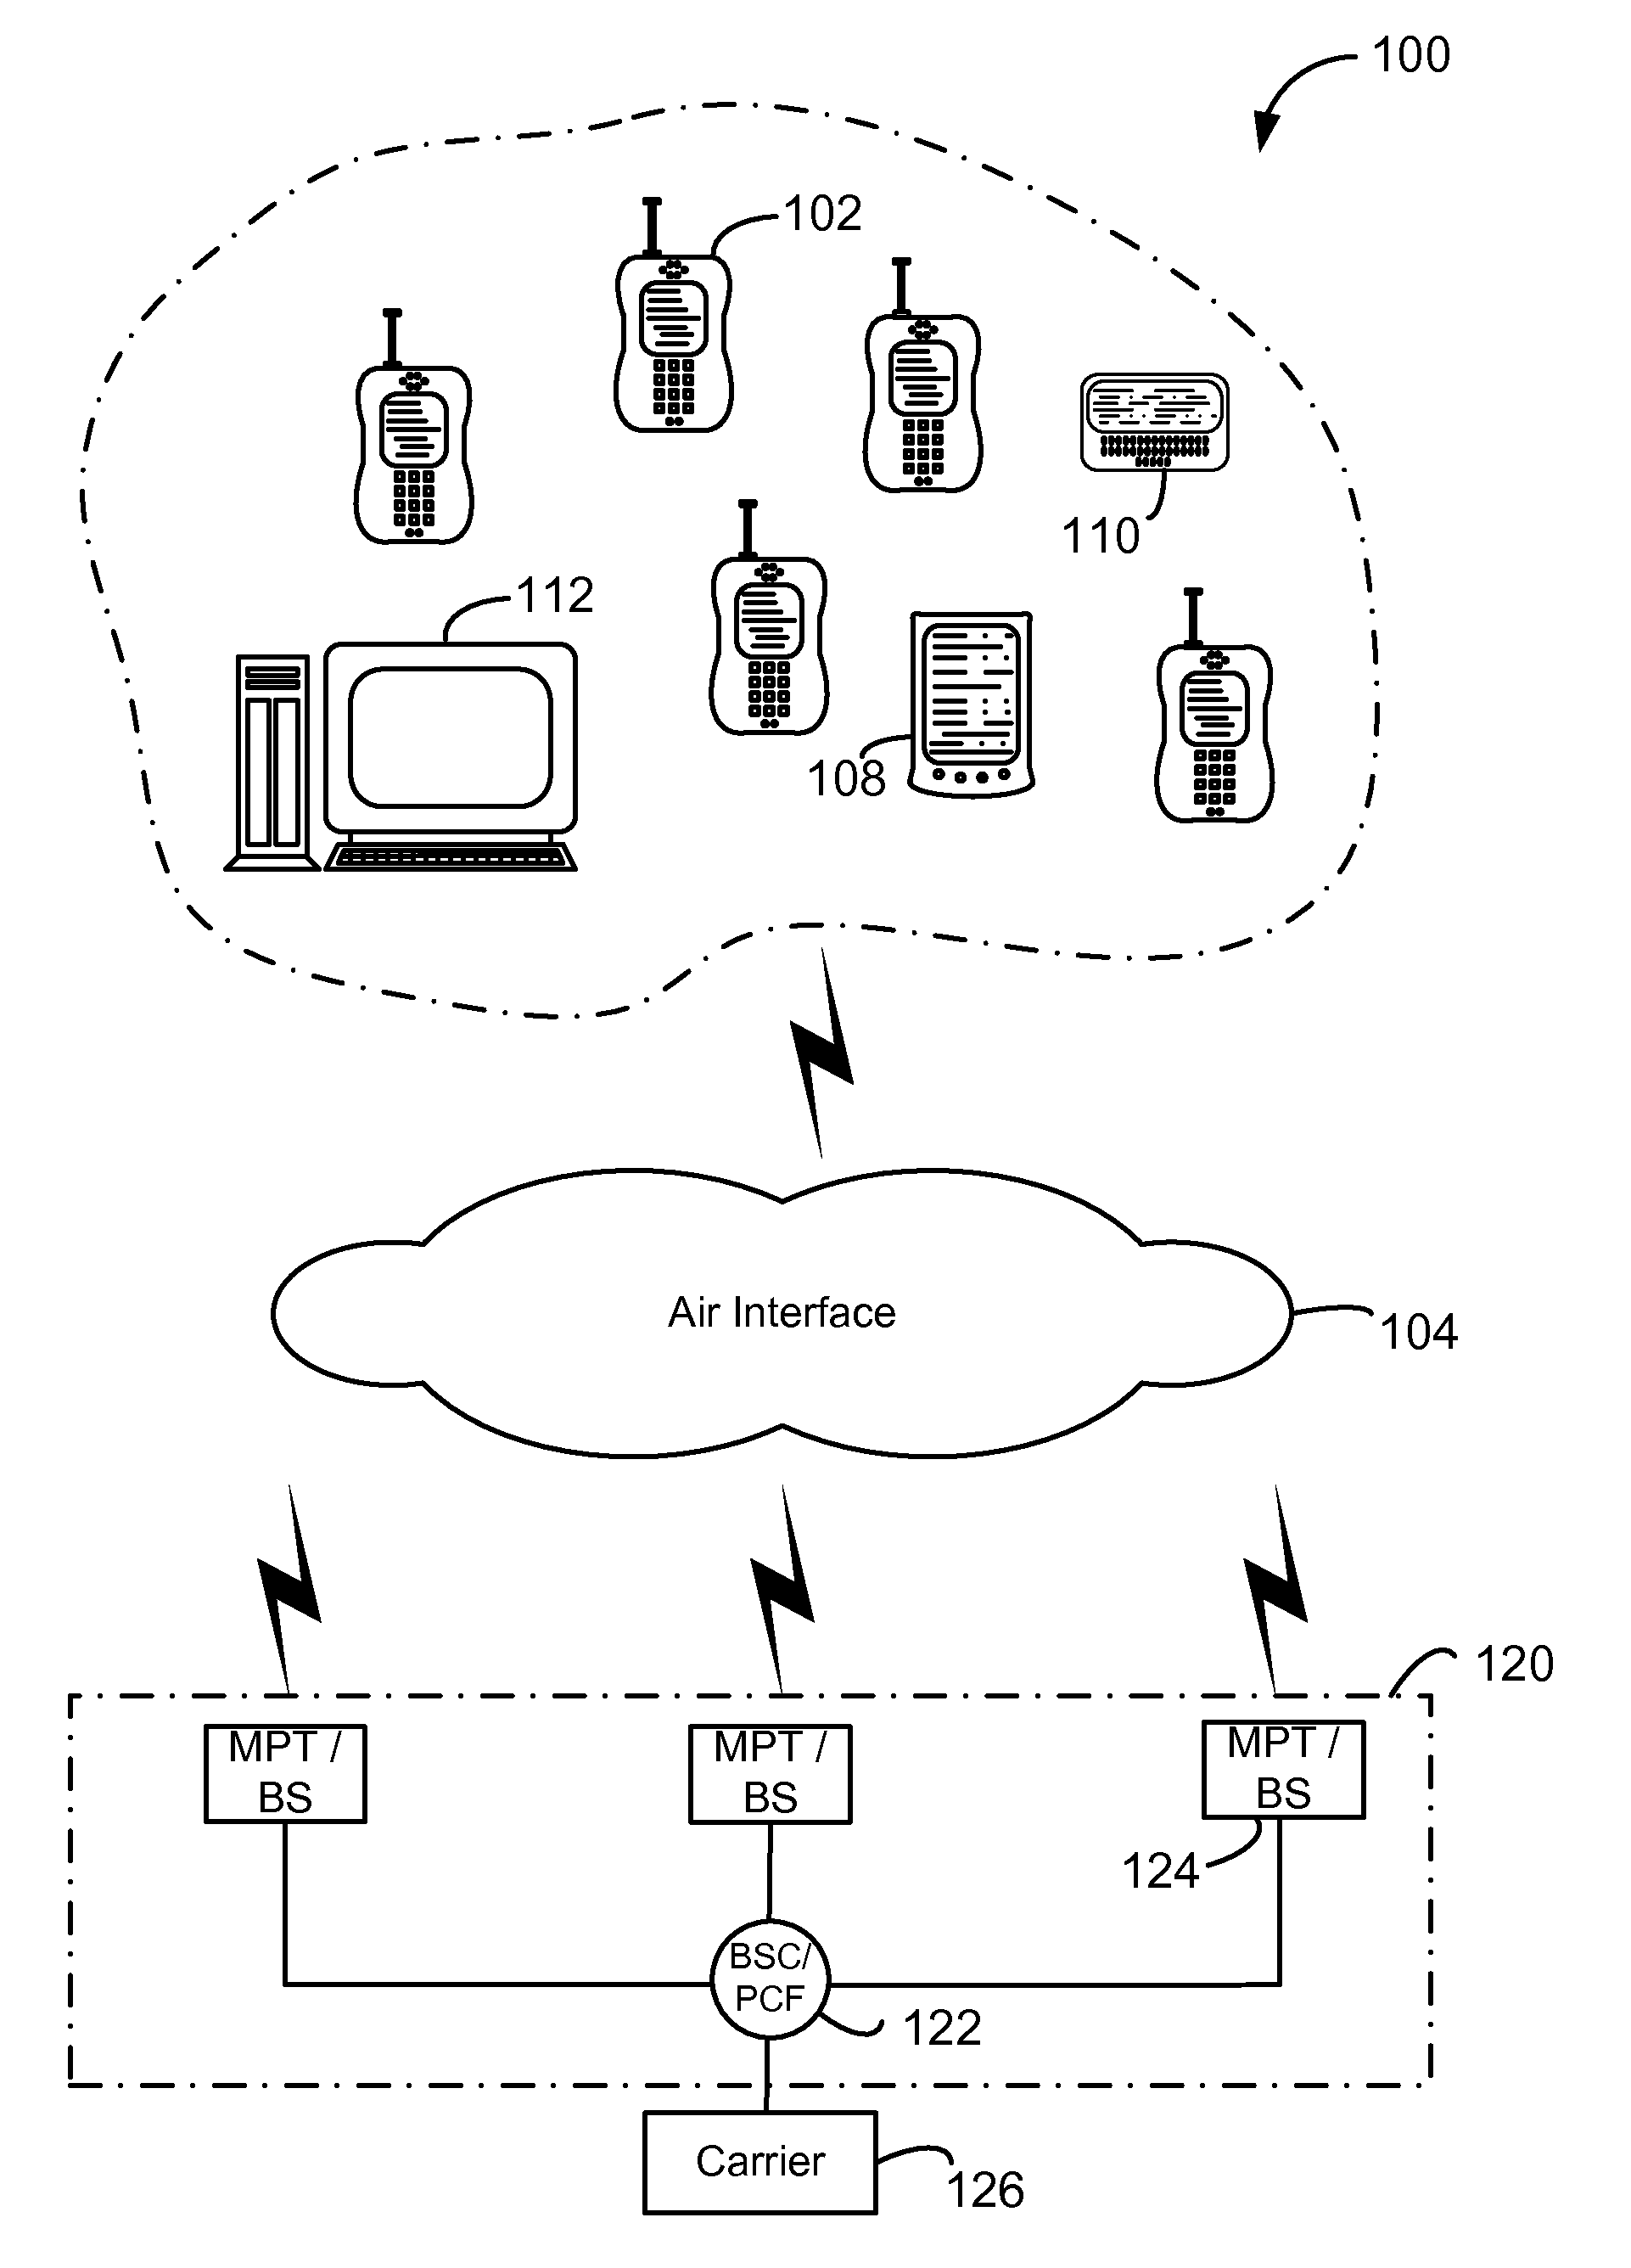 Dynamically adjusting paging cycles of a network at an access terminal based on service availability of another network within a wireless communication system